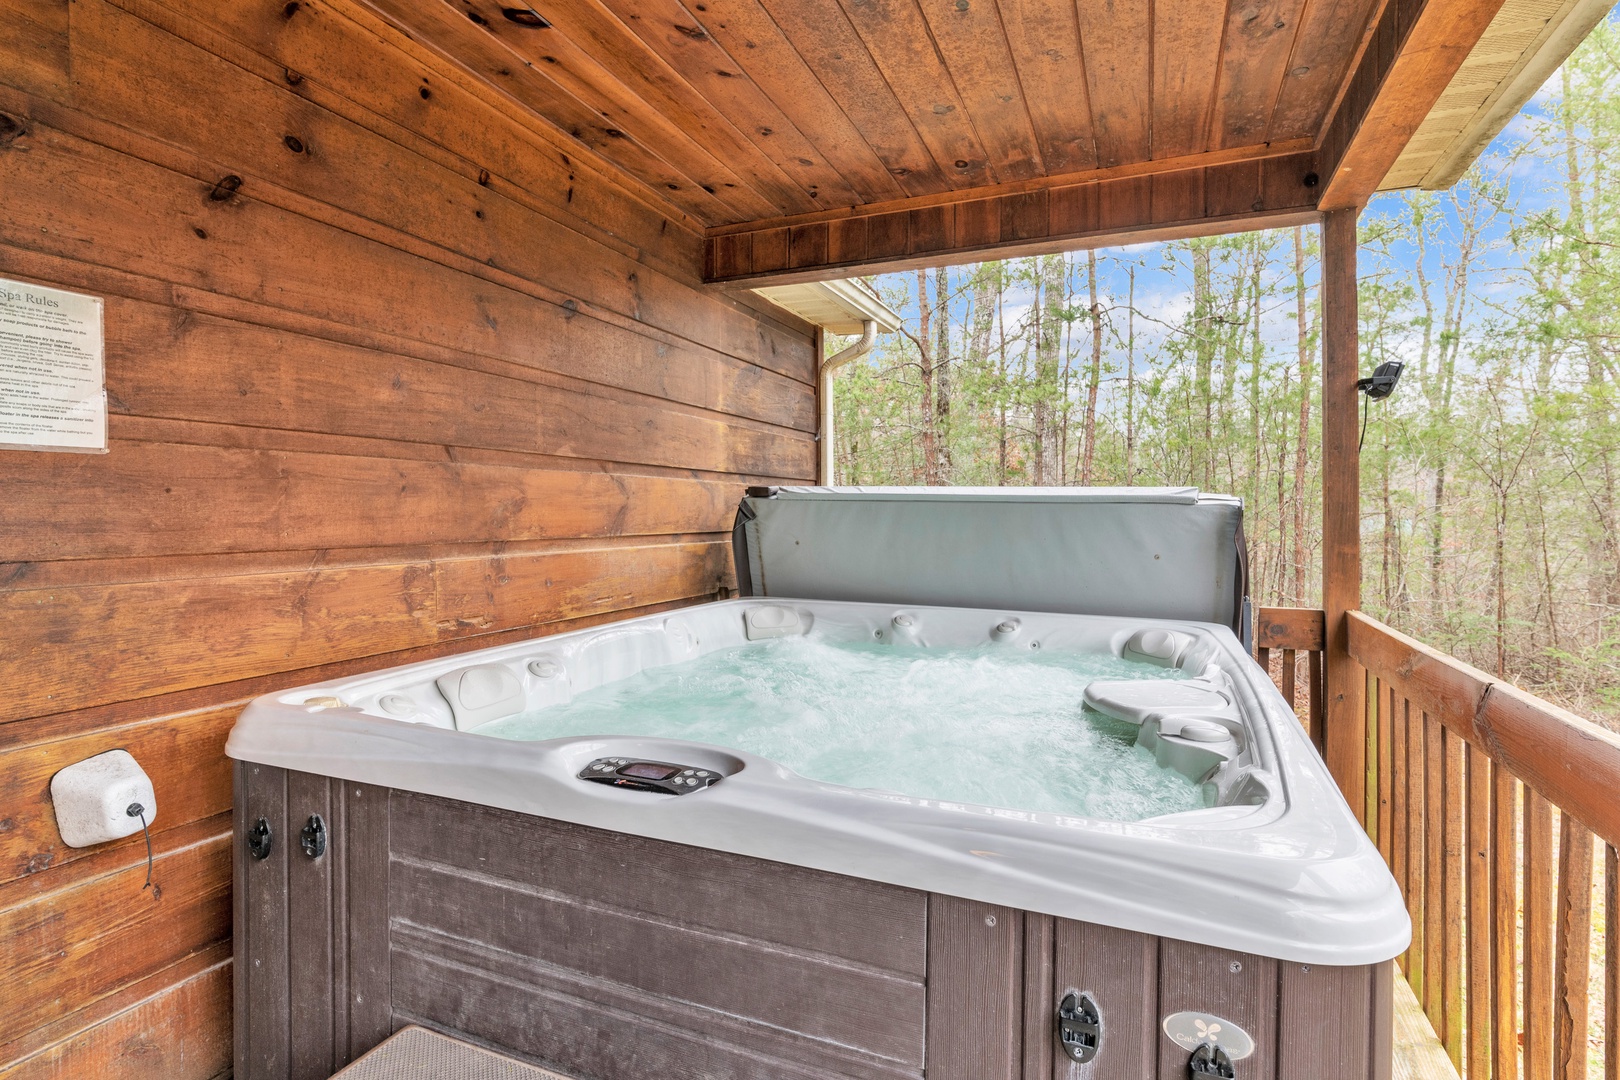 Soak your cares away with tranquil nature views in the private hot tub